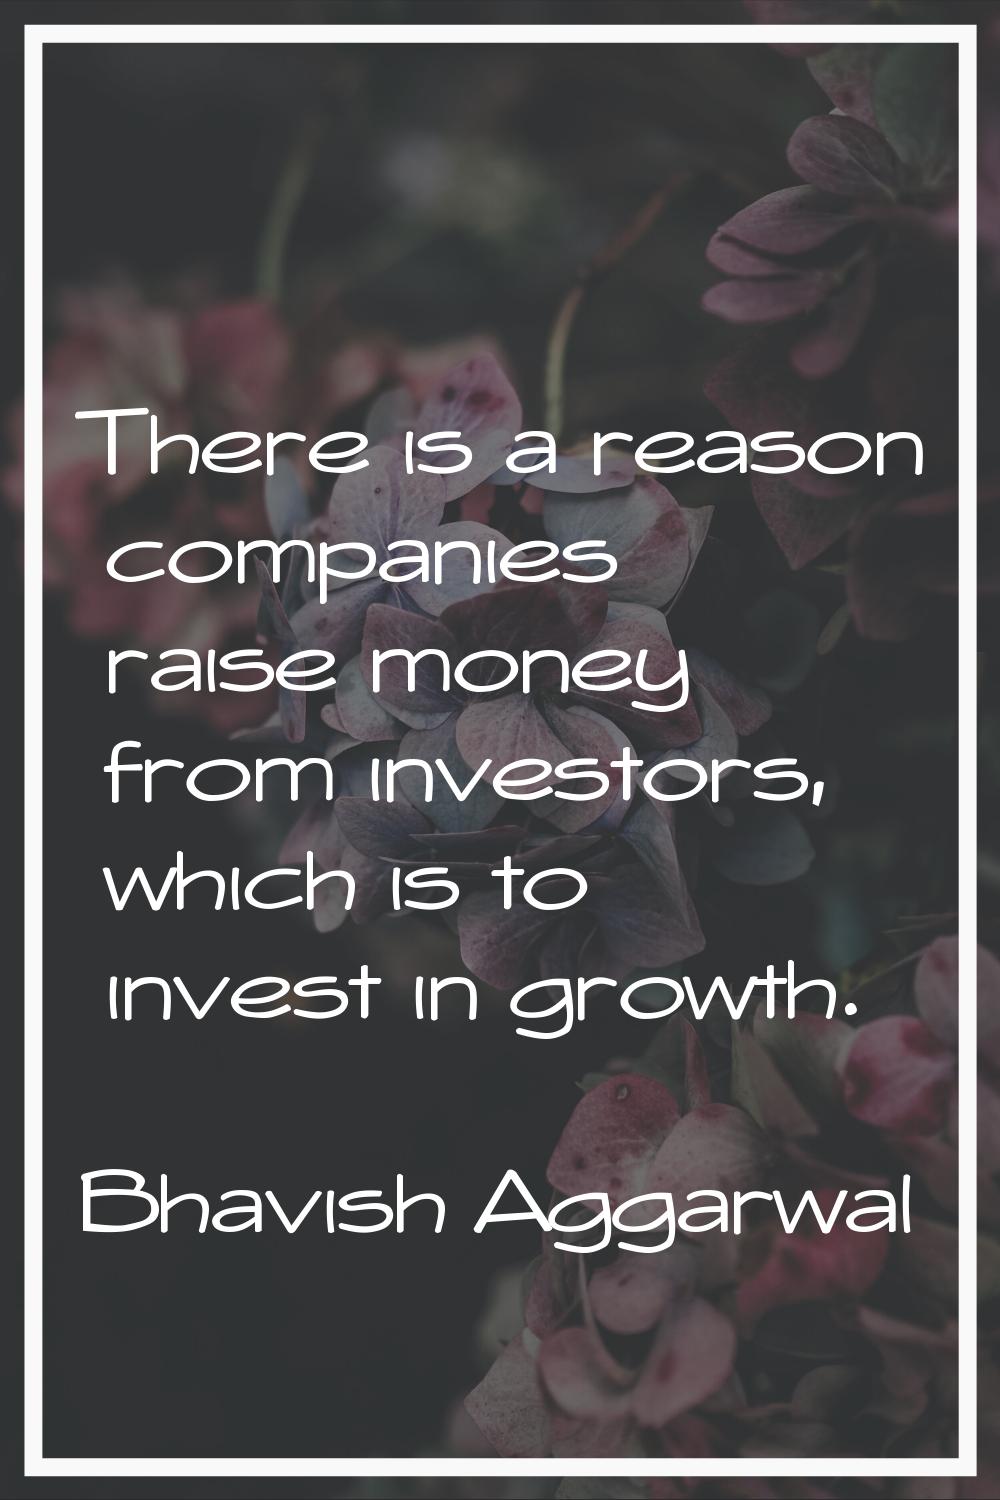 There is a reason companies raise money from investors, which is to invest in growth.